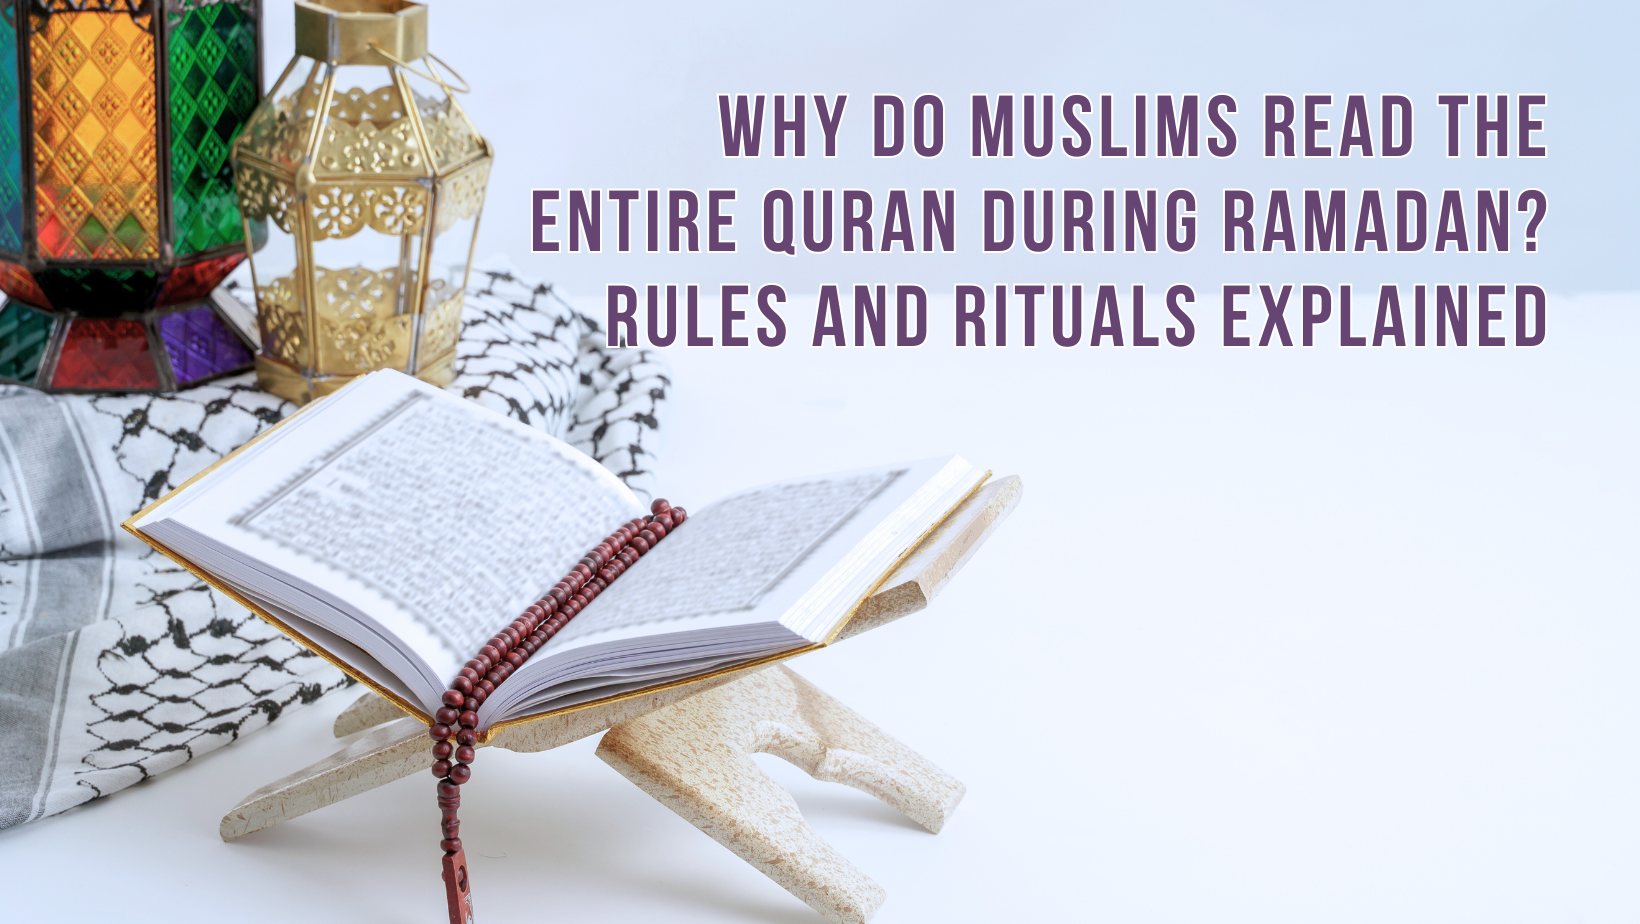 Why do Muslims read the entire Quran during Ramadan? Rules and rituals explained